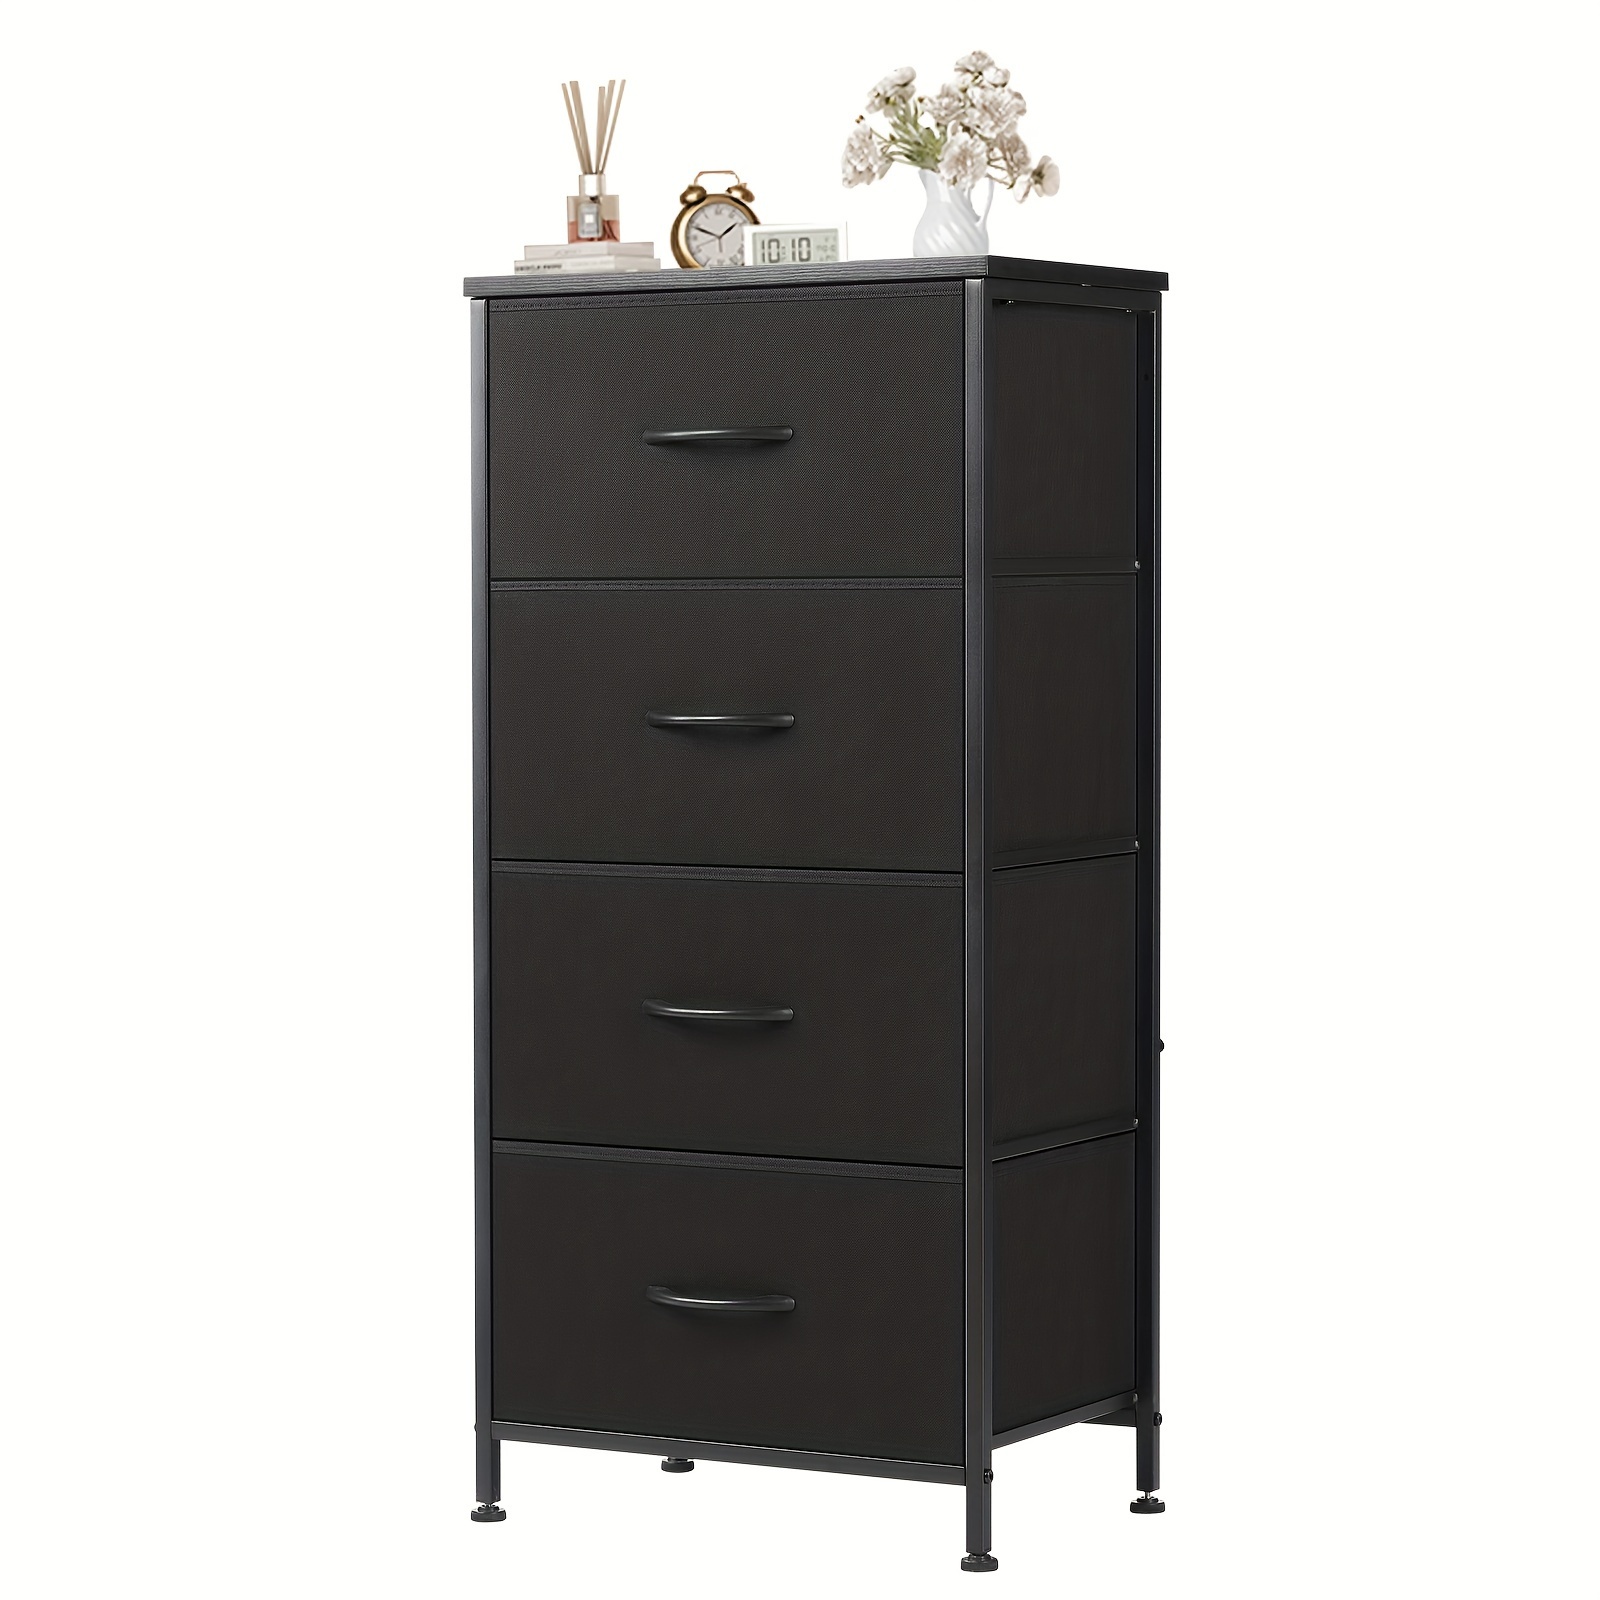 

Olixis Dresser With 4 Drawers, Fabric Closet Organizer, Dresser With Metal Frame, Chest Storage Tower For Outdoor, Living Room, Entryway